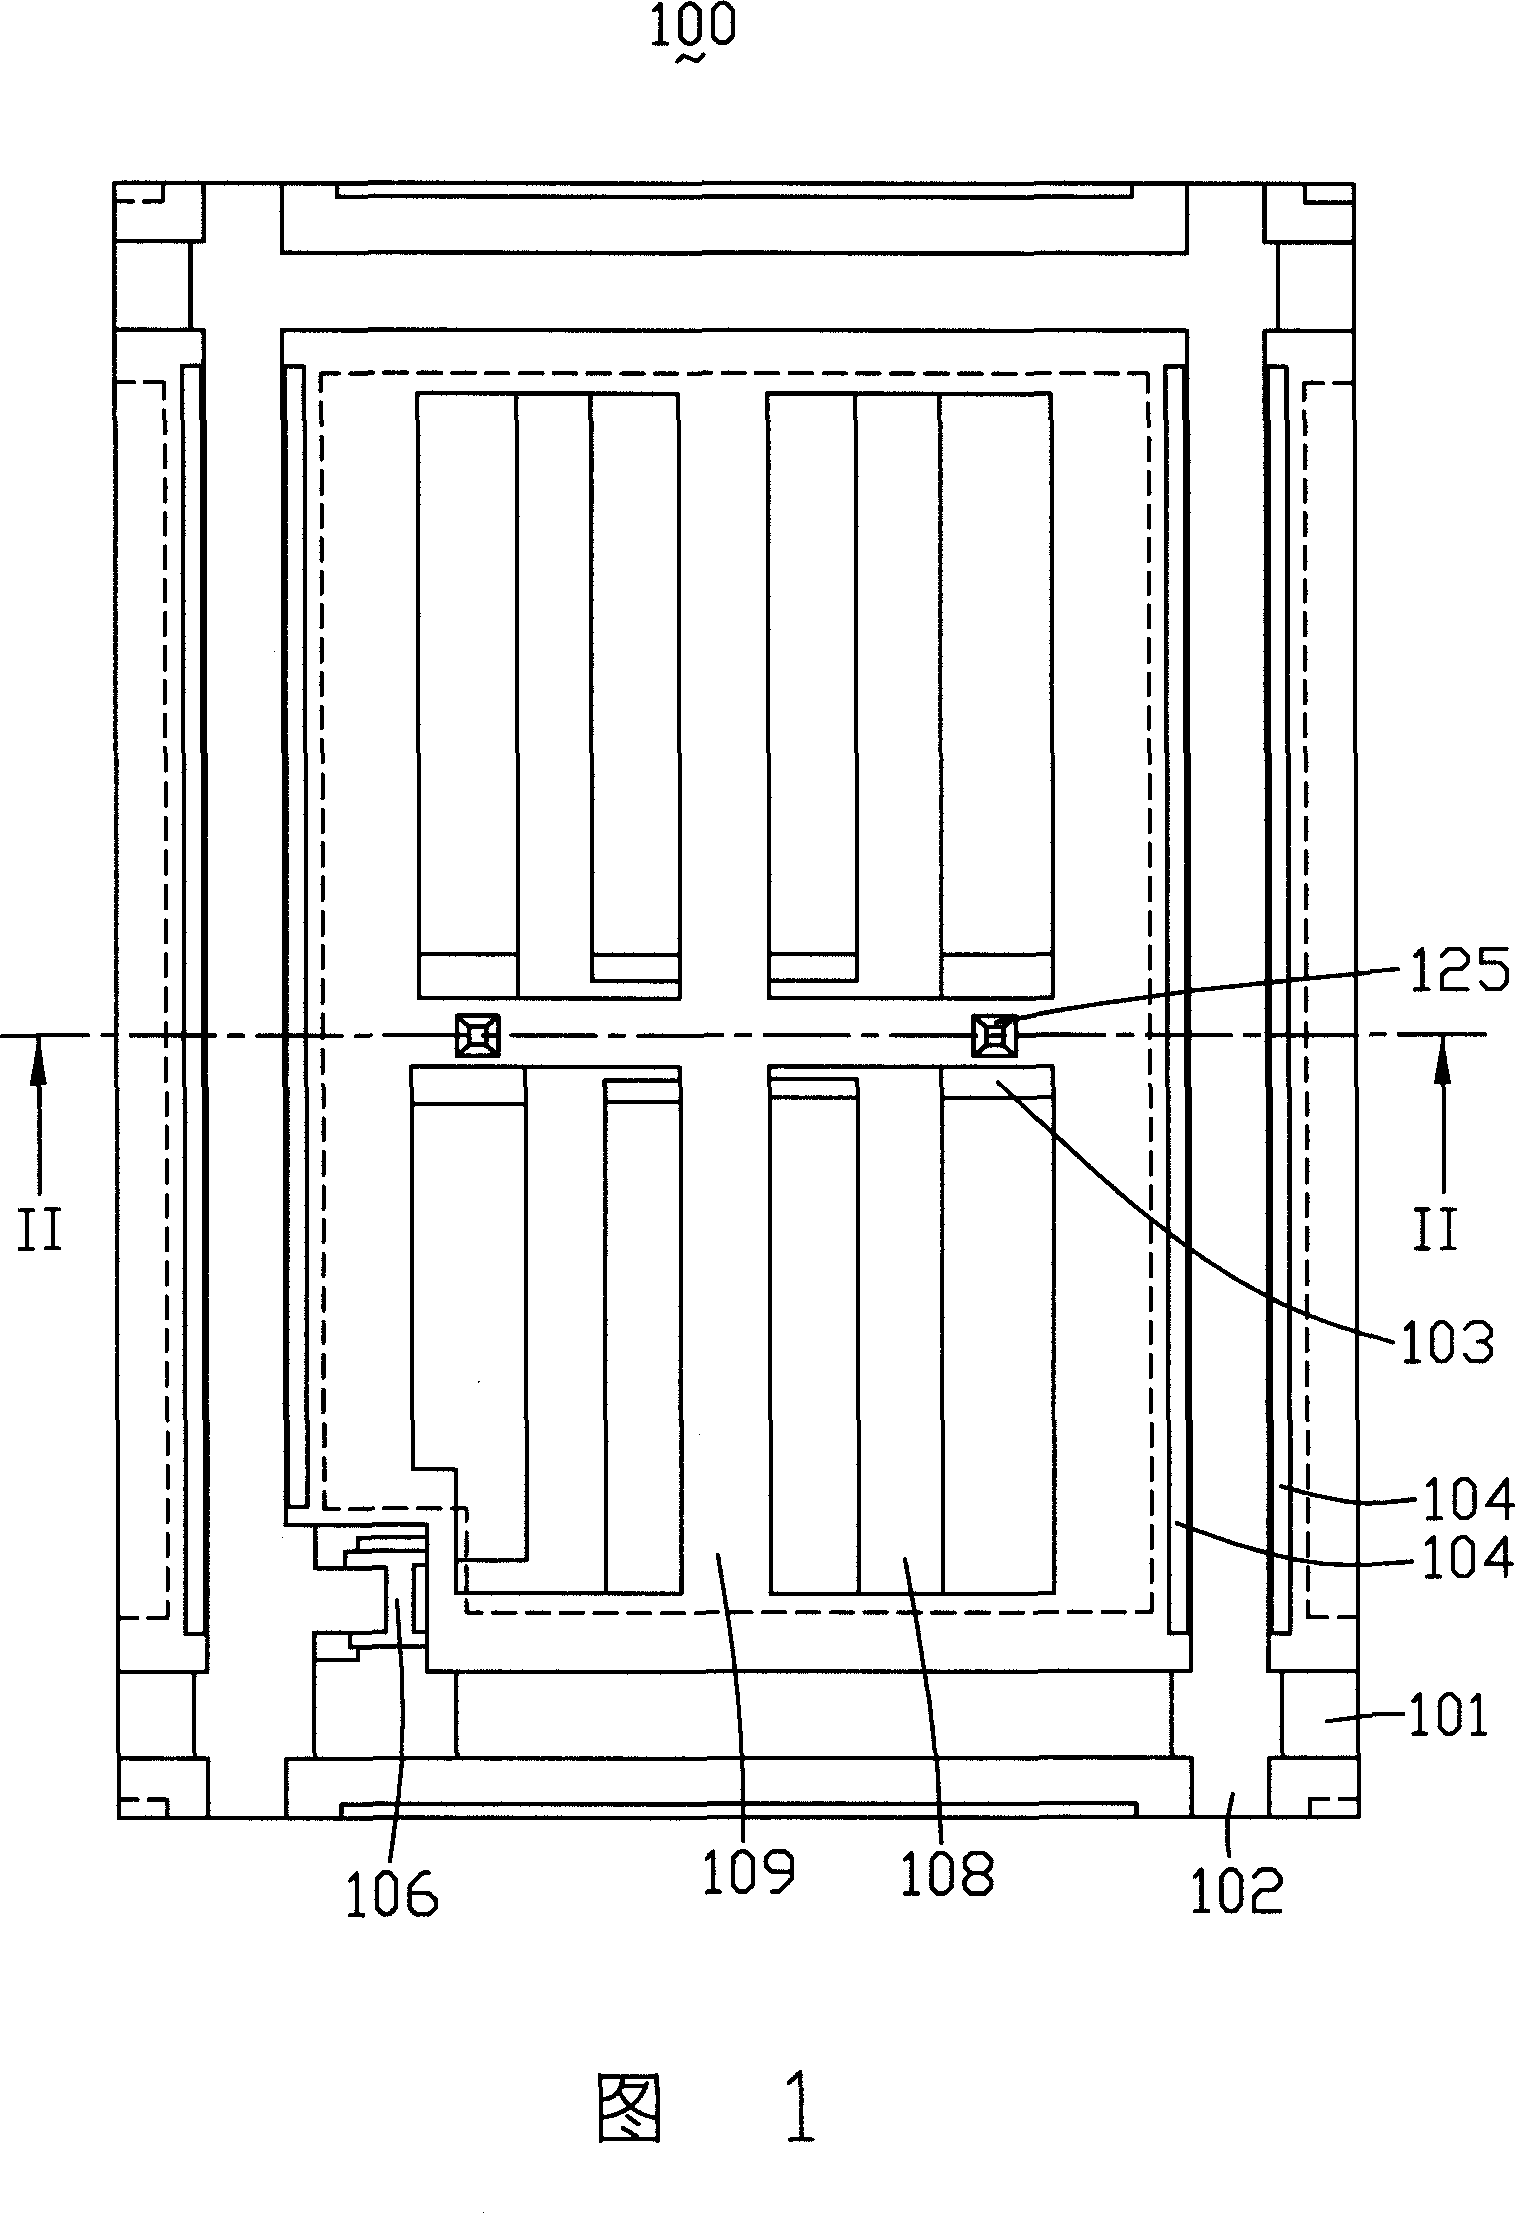 Lateral field switching mode LCD within flat panel